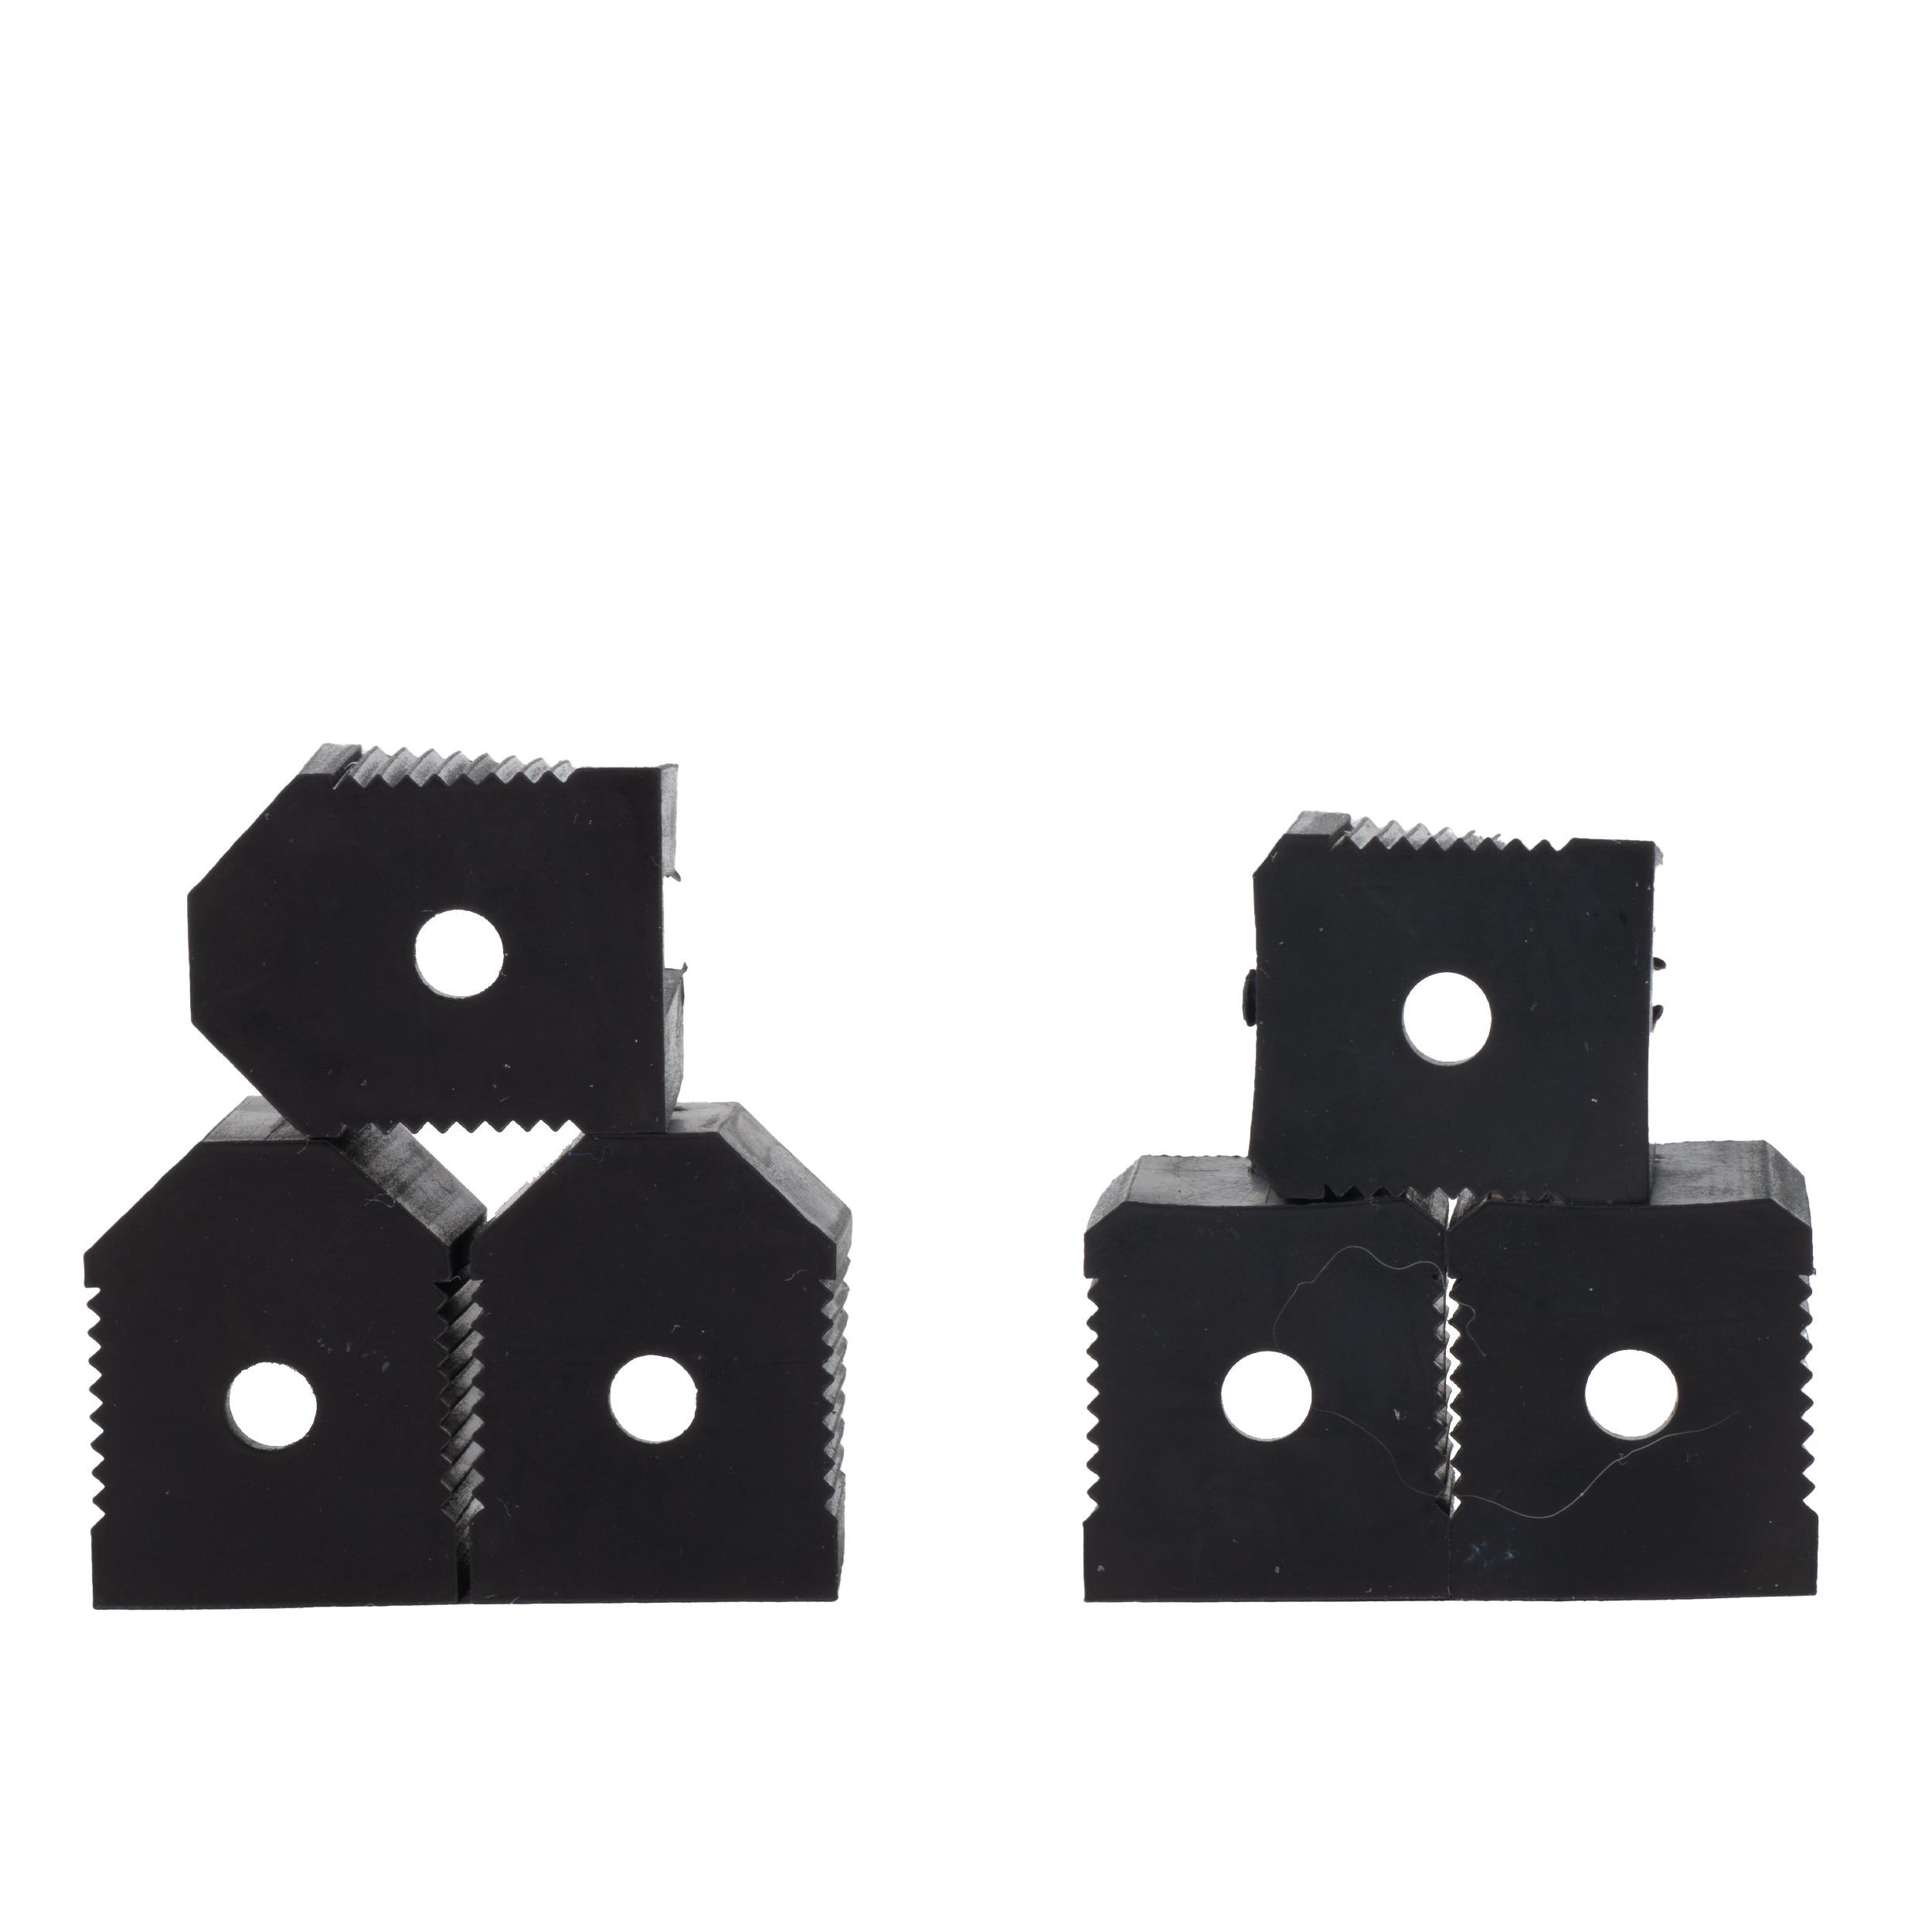 RBS PRO G2 Rubber Jaws - Set of 6